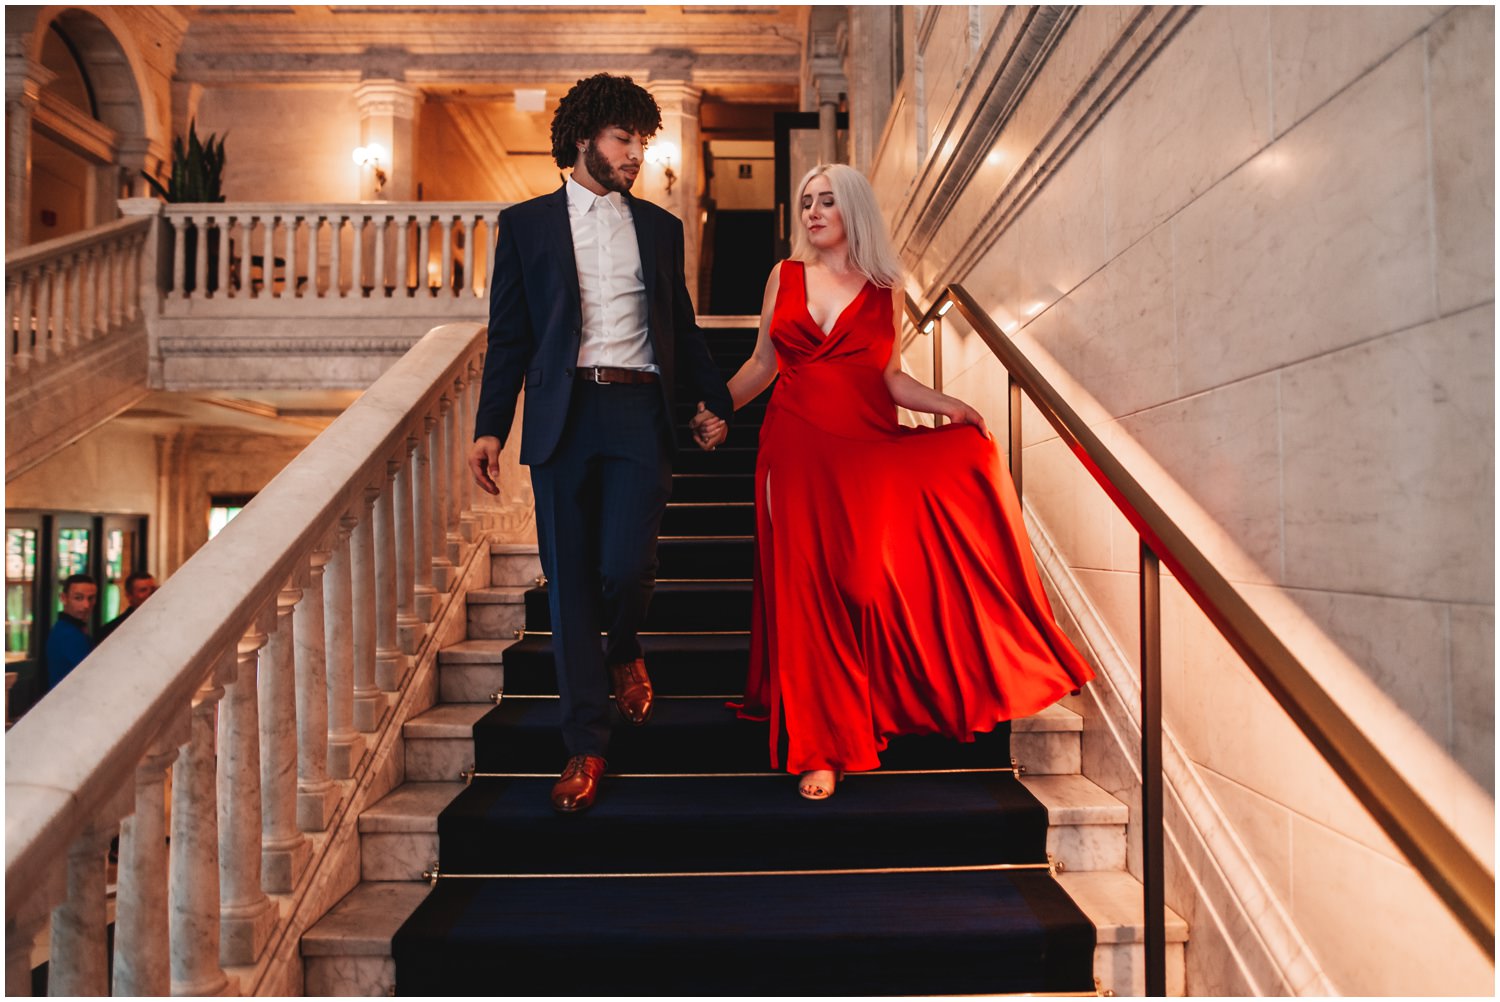 Downtown Chicago Engagement Session Photography - Gray Hotel staircase